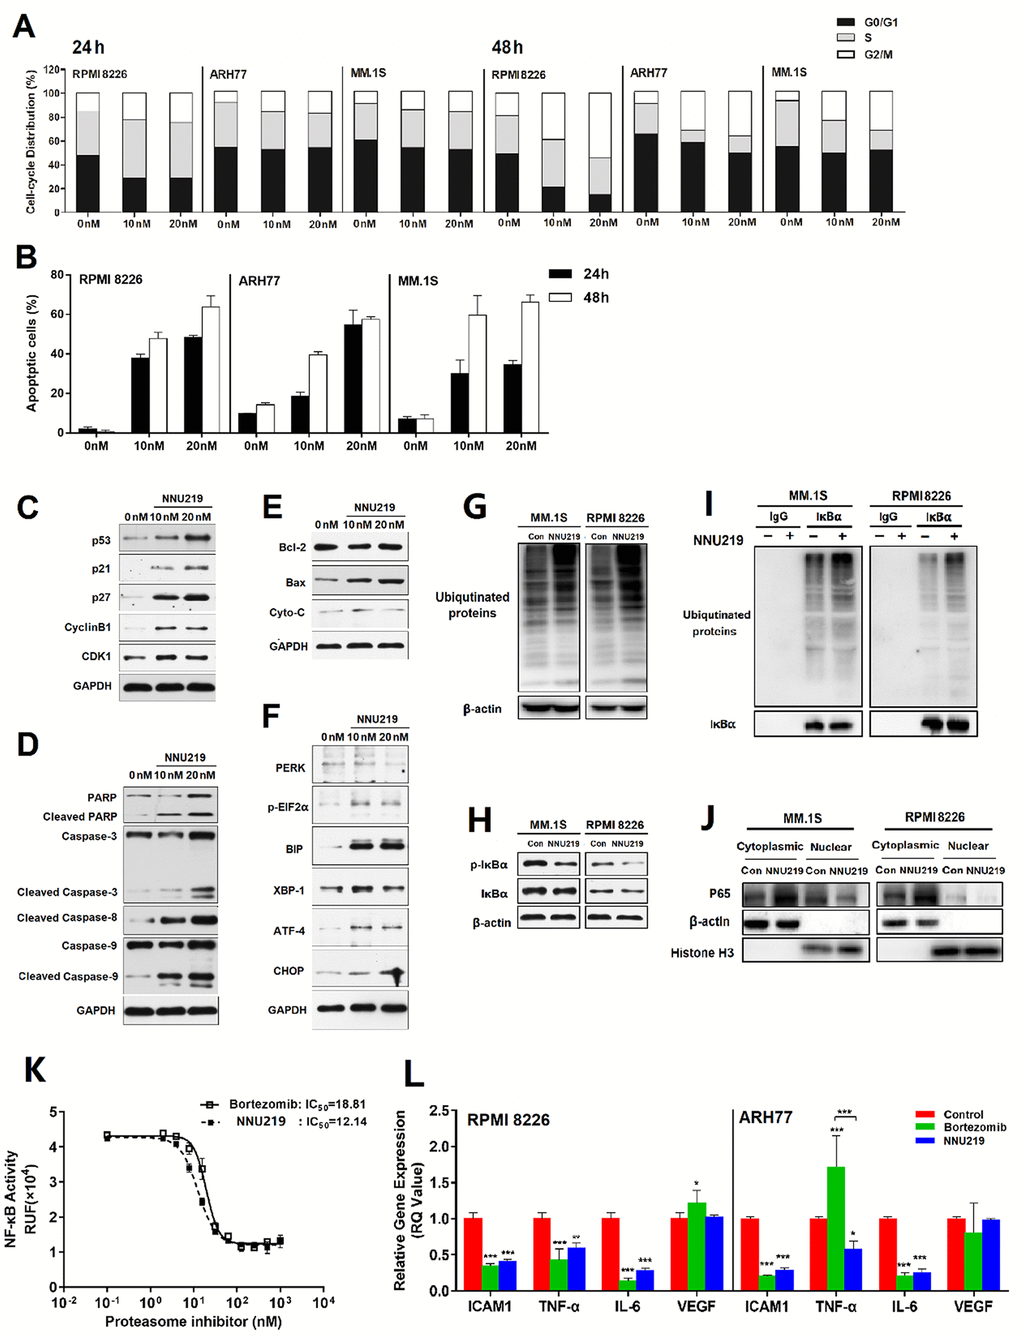 NNU219 induces apoptotic signal transduction and modulates the NF-κB signaling pathway in human MM cell lines. (A) The MM cell lines RPMI 8226, ARH77 and MM.1S were incubated with DMSO or NNU219 (10 and 20 nM) for 24 or 48 h, respectively. Cells were fixed with ethanol and stained with propidium iodide, then DNA content was determined by flow cytometry (p B) The MM cell lines RPMI 8226, ARH77 and MM.1S were incubated with DMSO or NNU219 (10 and 20 nM) for 24 or 48 h and induction of apoptosis was determined after annexin V-FITC/propidium iodide staining by flow cytometry. Data were presented as mean ± SD of three independent experiments (p C–F) RPMI 8226 cells were incubated with NNU219 (10 and 20 nM) for 24 h. After the incubation, cells were lysed and directly subjected to SDS-PAGE, transferred to membranes and blotted with indicated antibodies. GAPDH immunoblotting was included for protein loading control. Blots in the figures were representatives of three independent experiments. (G) MM1.S and RPMI 8226 cell lines were treated with 10 nM of NNU219 for 24 h. The stimulated cells were lysed and 20 μg of protein was processed for ubiquitin immunoblotting. (H) MM1.S and RPMI 8226 cells were treated with DMSO, 10 nM of NNU219 for 24 h and immunoblotted using anti-IκBα and anti-phospho-IκBα antibodies. (I) MM1.S and RPMI 8226 cell lines were treated with 10 nM of NNU219 for 24 h. Correlative proteins were immunoprecipitated from 1 mg of MM cell lysate using IκBα or IgG antibody (rabbit) and coupled to protein A/G agarose beads. The beads were washed by IP buffer and processed by immunoblotting for ubiquitin, p65 or IκBα. (J) MM1.S and RPMI 8226 cell line was treated with 10 nM of NNU219 for 24 h. Nuclear and cytoplasmic protein fractions were separated from the total lysate and analyzed for p65, β-actin and histone antibodies by western blot analysis. Blots in the figure were representative of three independent experiments. (K) The transfected NF-κB/Luciferase 293T cells were incubated with increasing concentrations of NNU219 or bortezomib for 6 h. Cells were then stimulated with 10 ng/ml of TNF-α for another 18 h. The activity of expressed luciferase was determined by using the Dual-Luciferase Reporter Assay System. (L) RPMI 8226 or ARH77 cell lines were treated with DMSO, IC50 of NNU219 or bortezomib for 12 h and harvested. Total RNA was isolated and subjected to qRT-PCR. The gene expression level of ICAM1, TNF-α, IL6 and VEGF was normalized to GAPDH using the 2−ΔΔCT method. In above experiments, the control group was incubated with the same concentration of DMSO in normal culture medium. Values were expressed as mean ± SD of triplicate samples of three independent experiments (*, p p p 